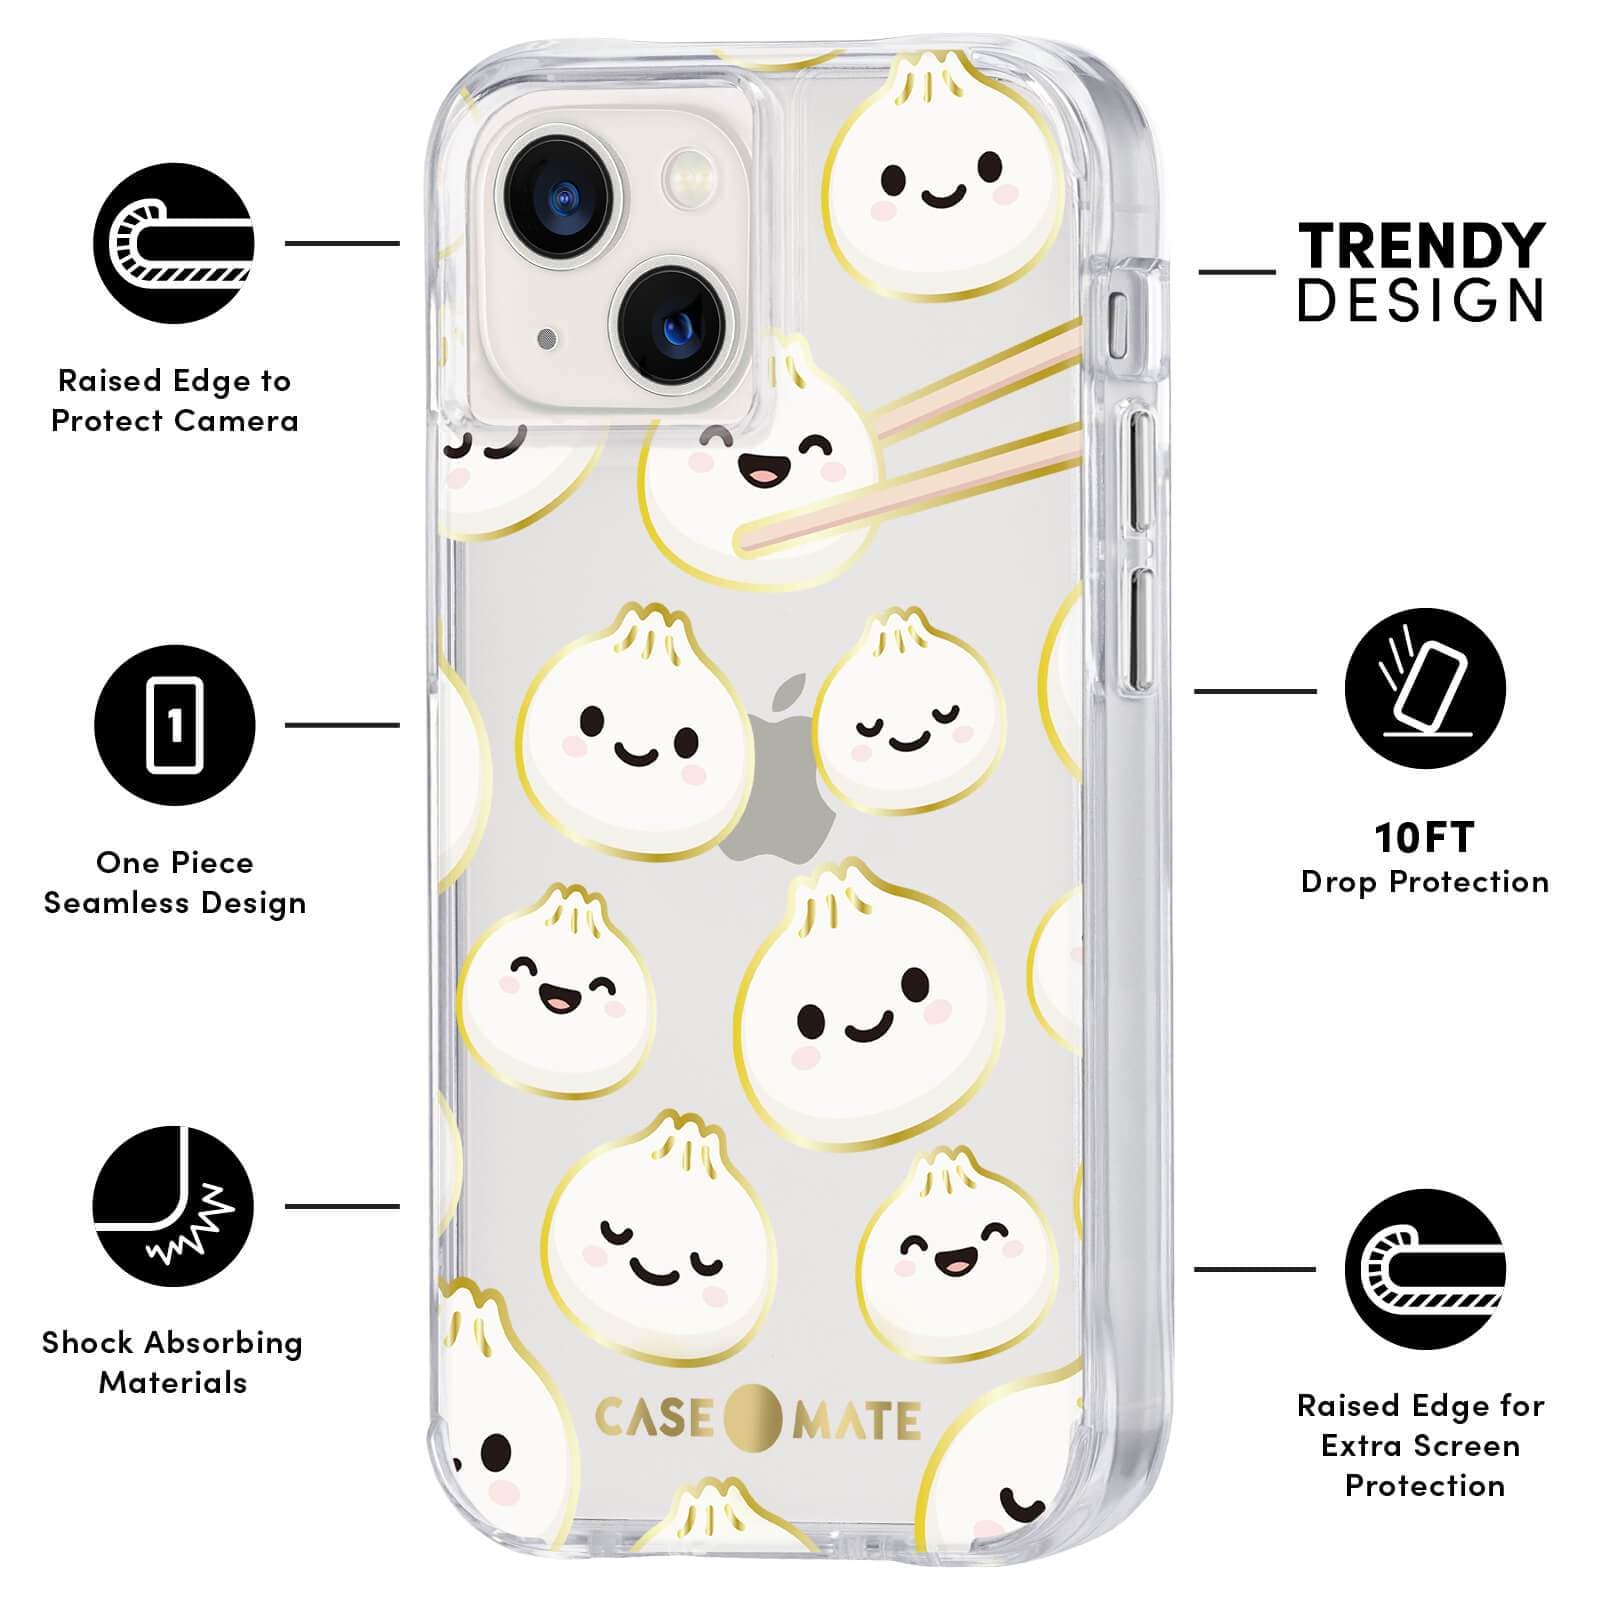 FEATURES: RAISED EDGE TO PROTECT CAMERA, ONE PIECE SEAMLESS DESIGN, SHOCK ABSORBING MATERIALS, TRENDY DESIGN, 10FT DROP PROTECTION, RAISED EDGE FOR EXTRA SCREEN PROTECTION. COLOR::CUTE AS A DUMPLING